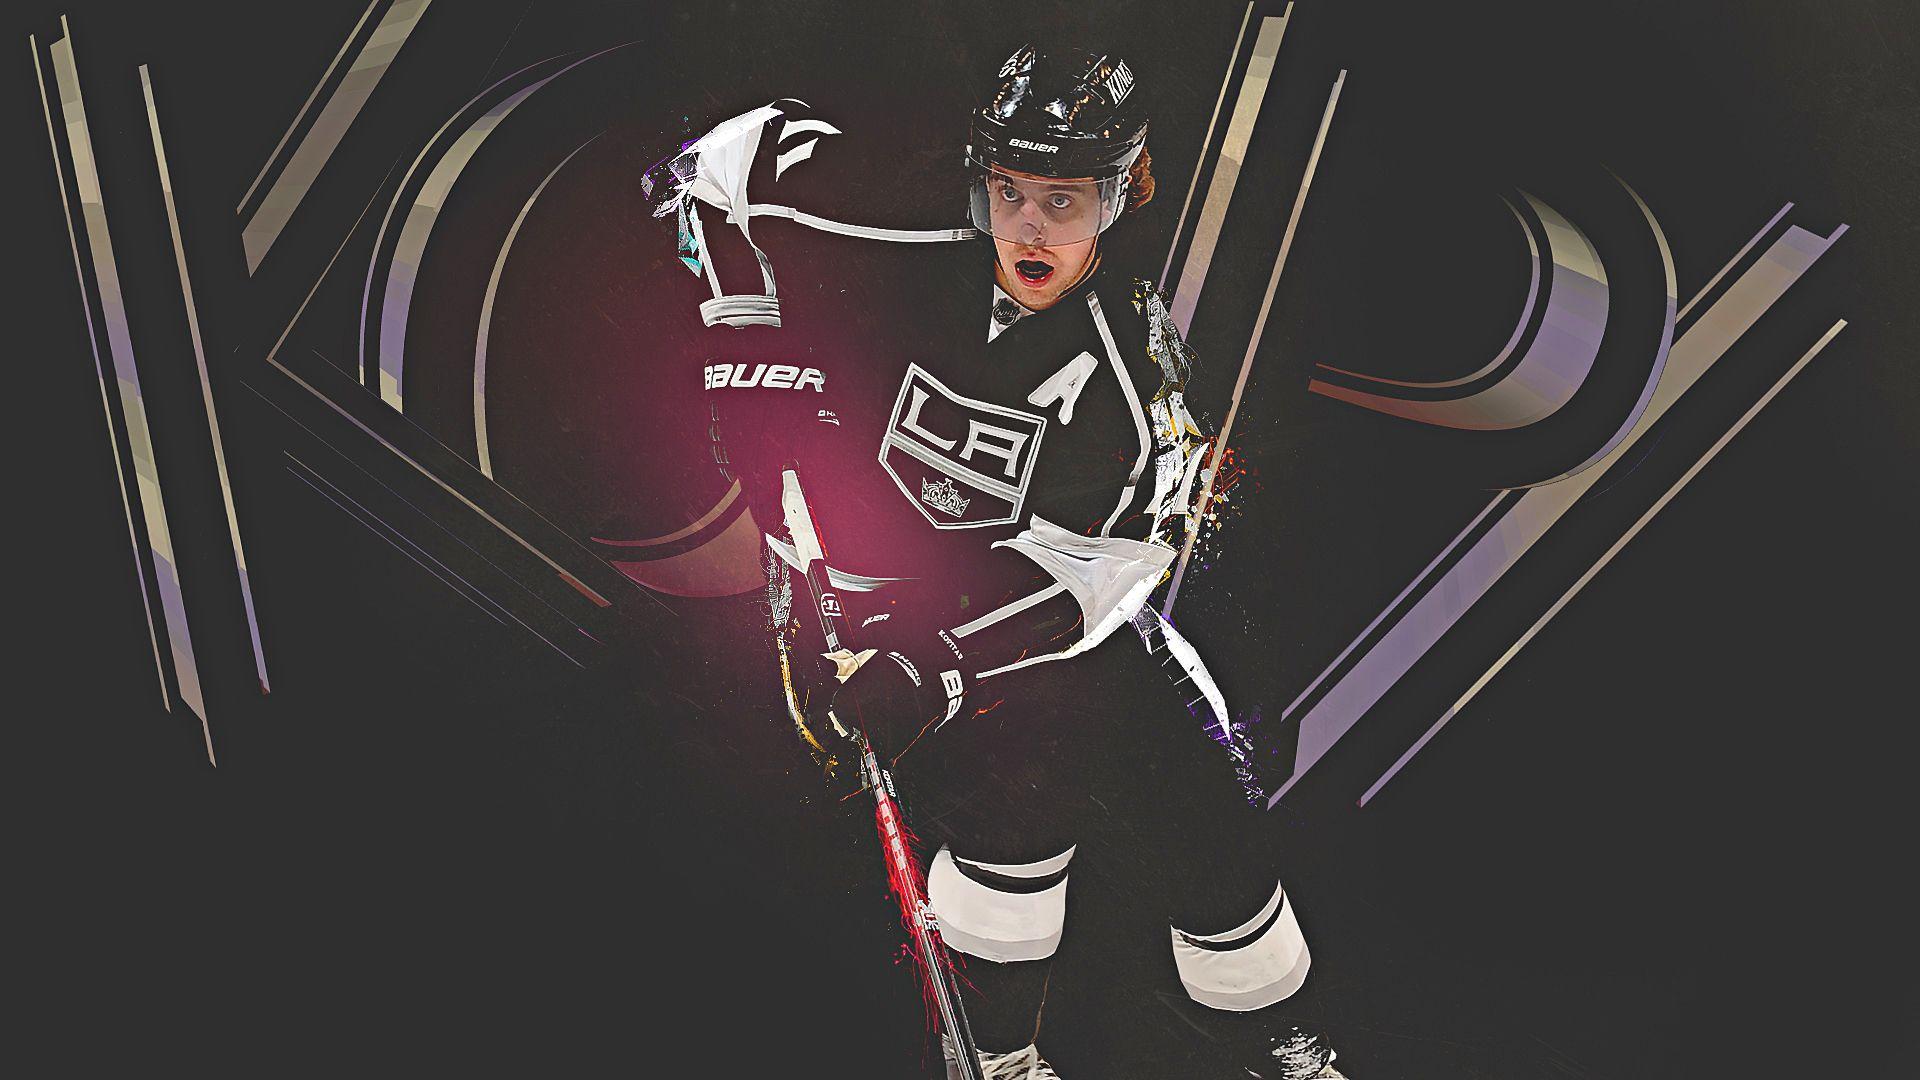 Anze Kopitar wallpaper by anapi - Download on ZEDGE™